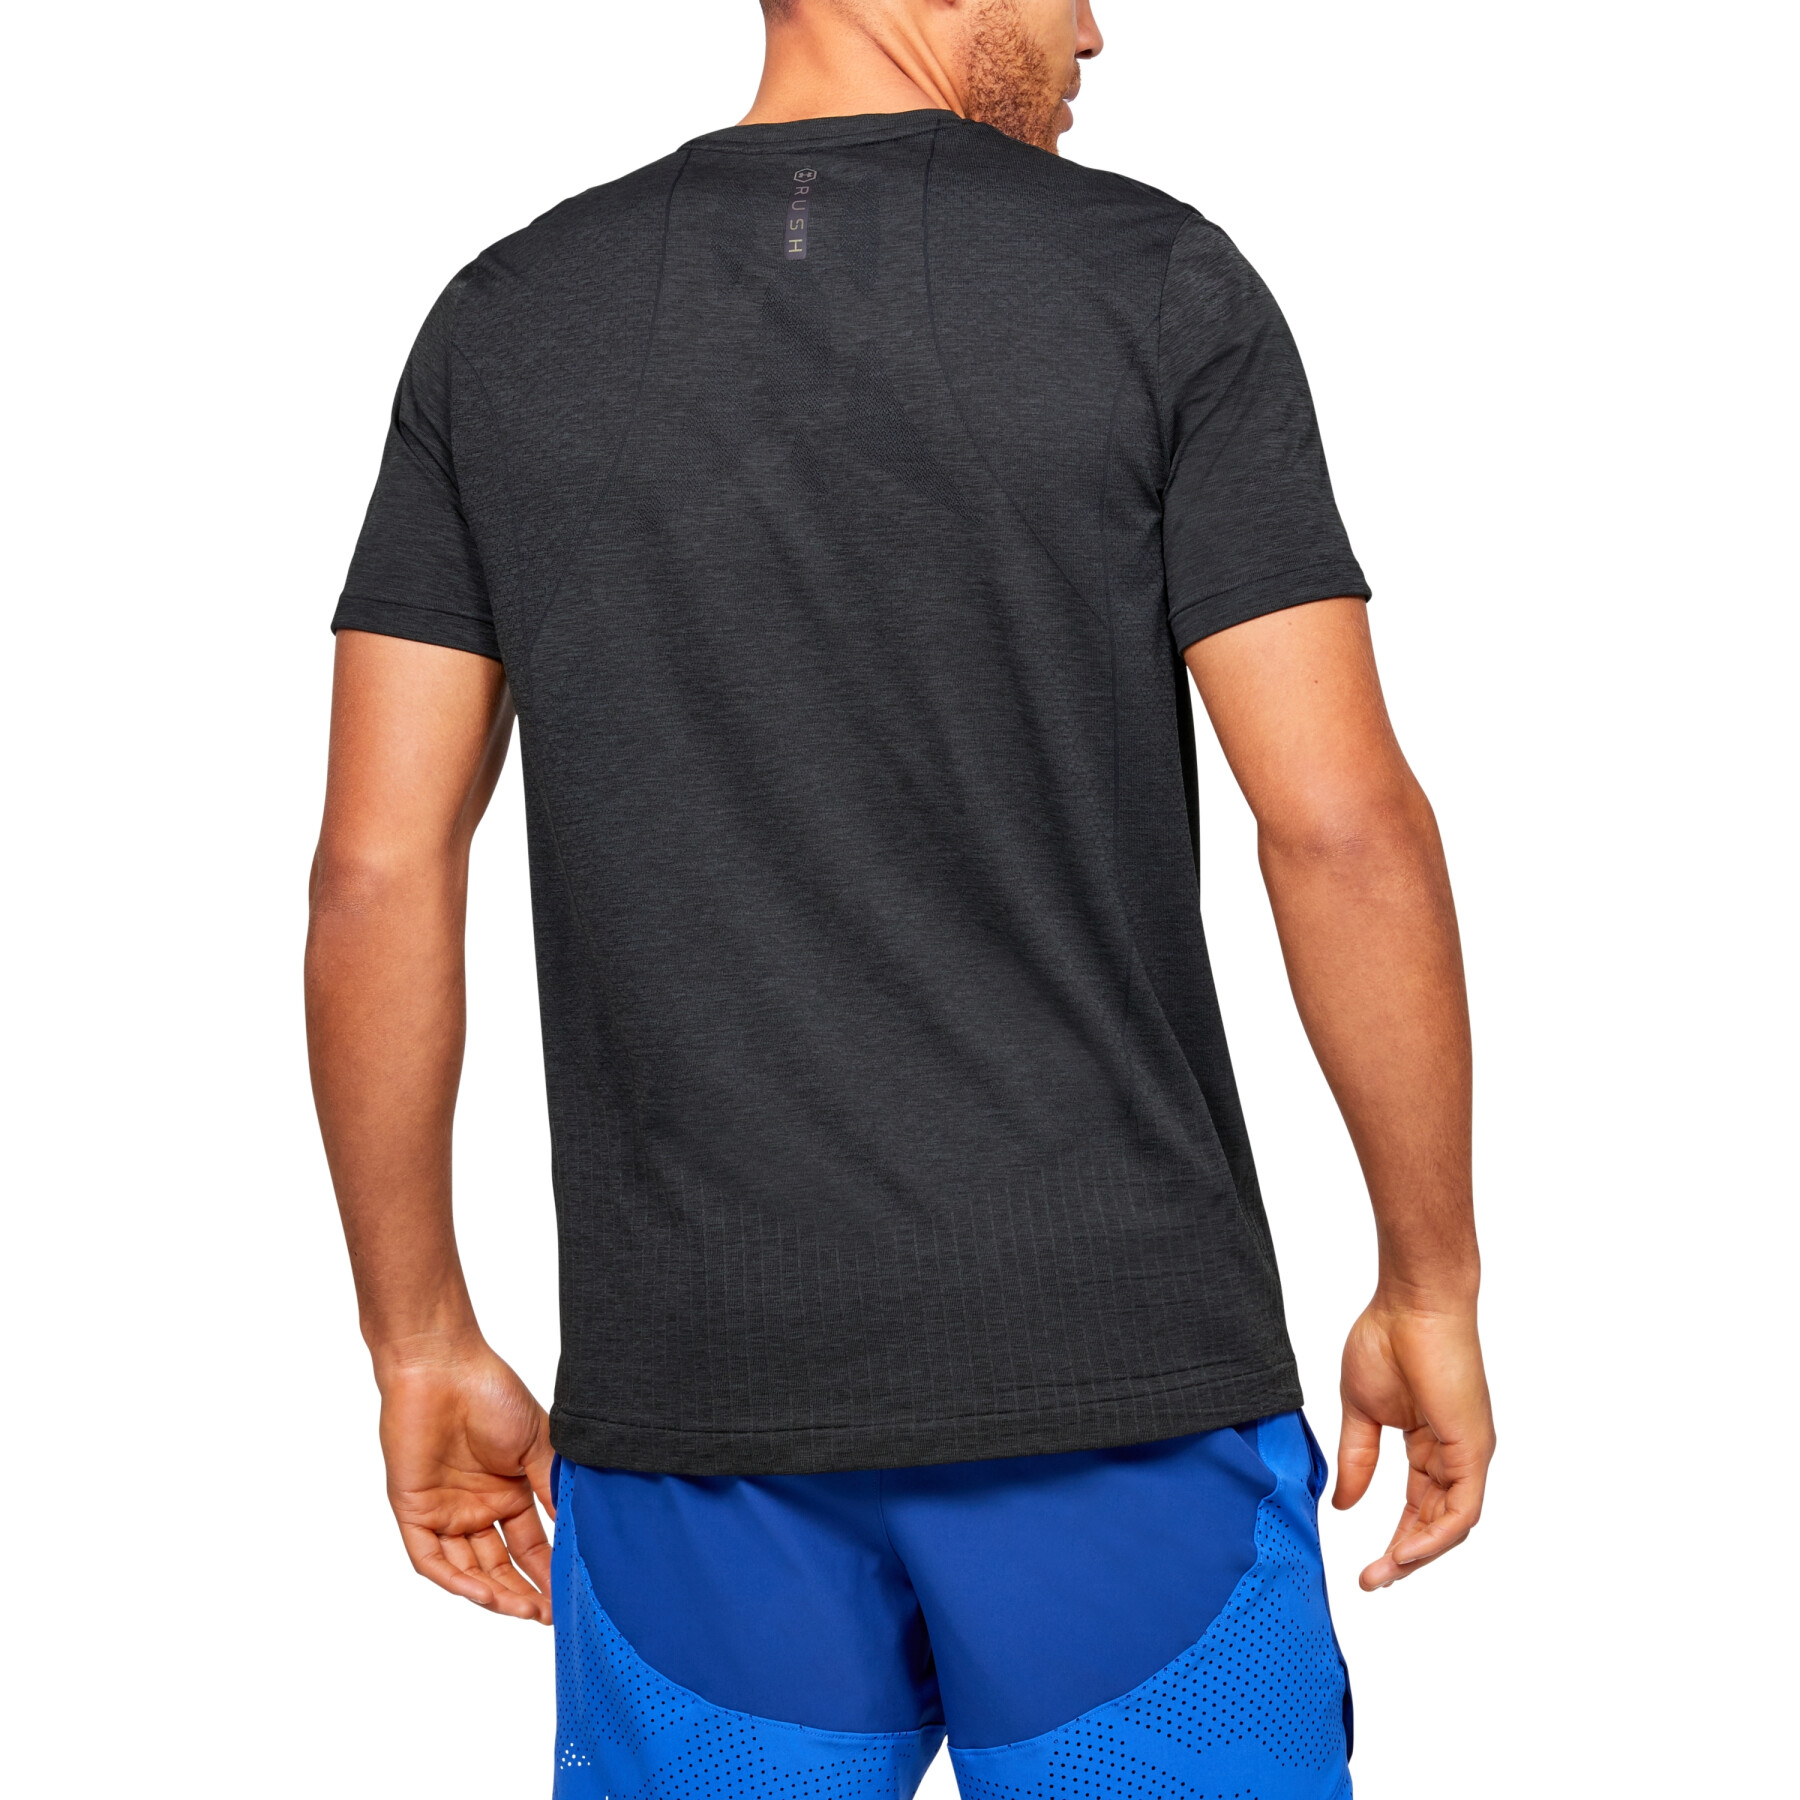 T-Shirt Under Armour RUSH™ Seamless Fitted